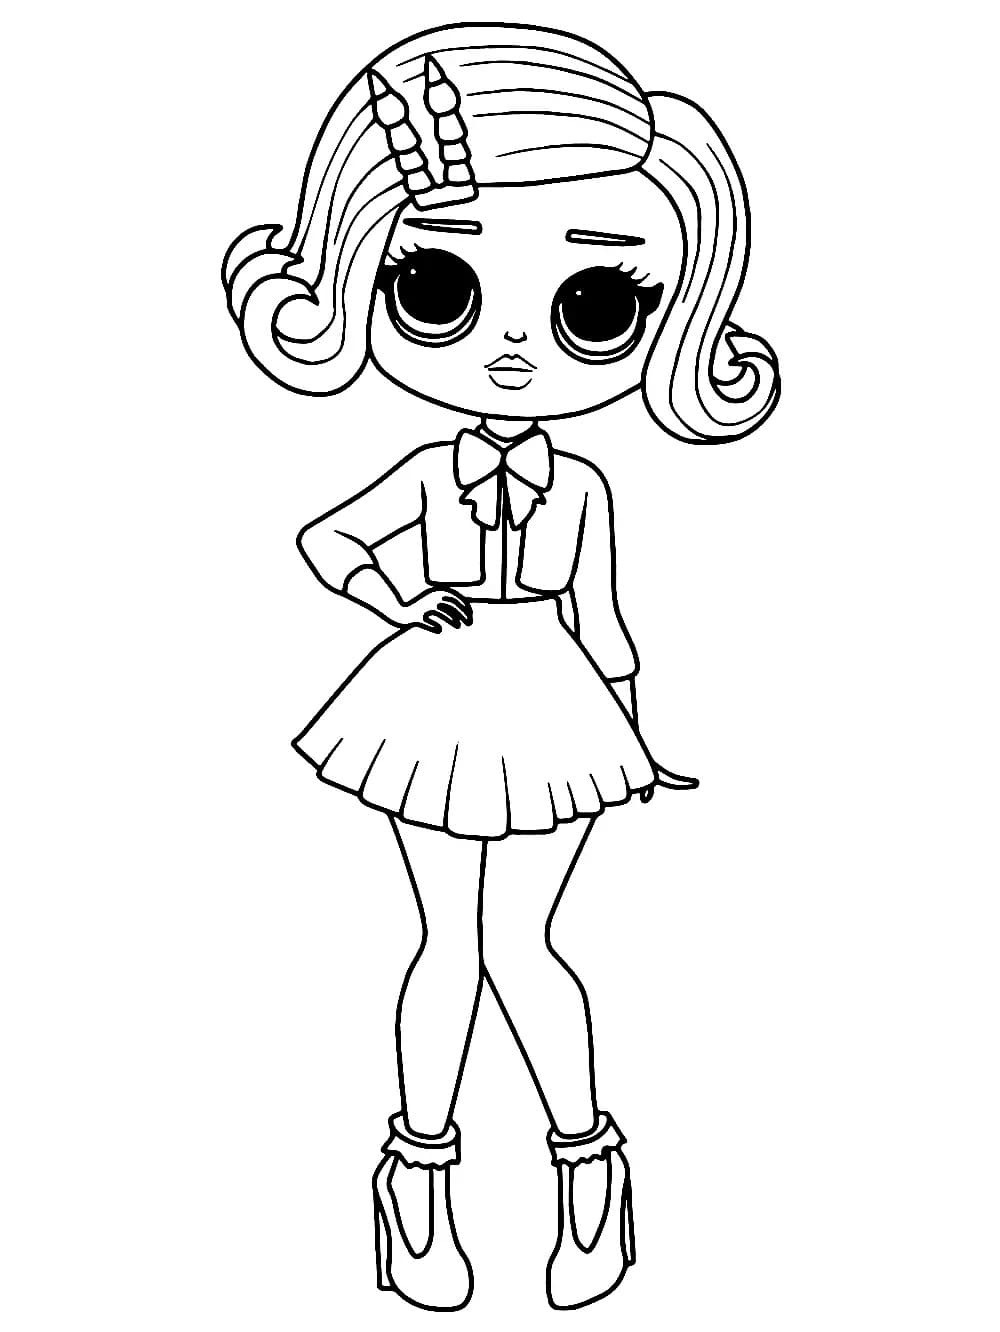 Uptown Girl LOL OMG coloring page